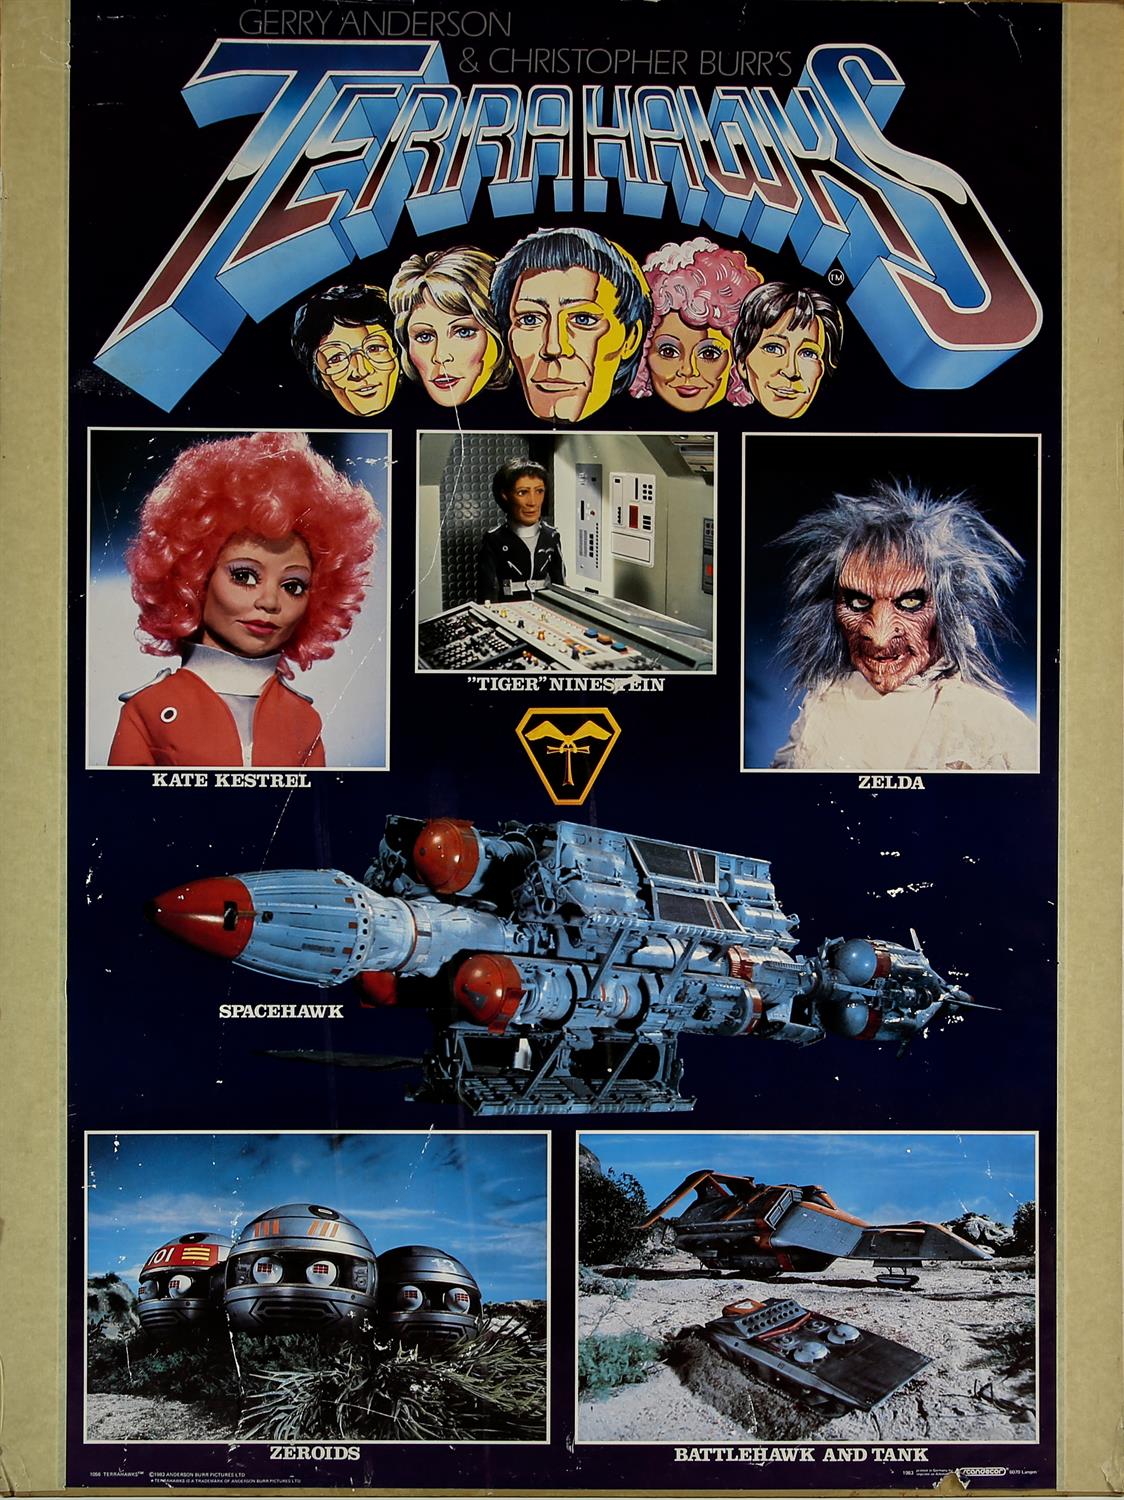 Terrahawks (1983) Commercial poster, printed in Germany, mounted on board, 30 by 40 inches